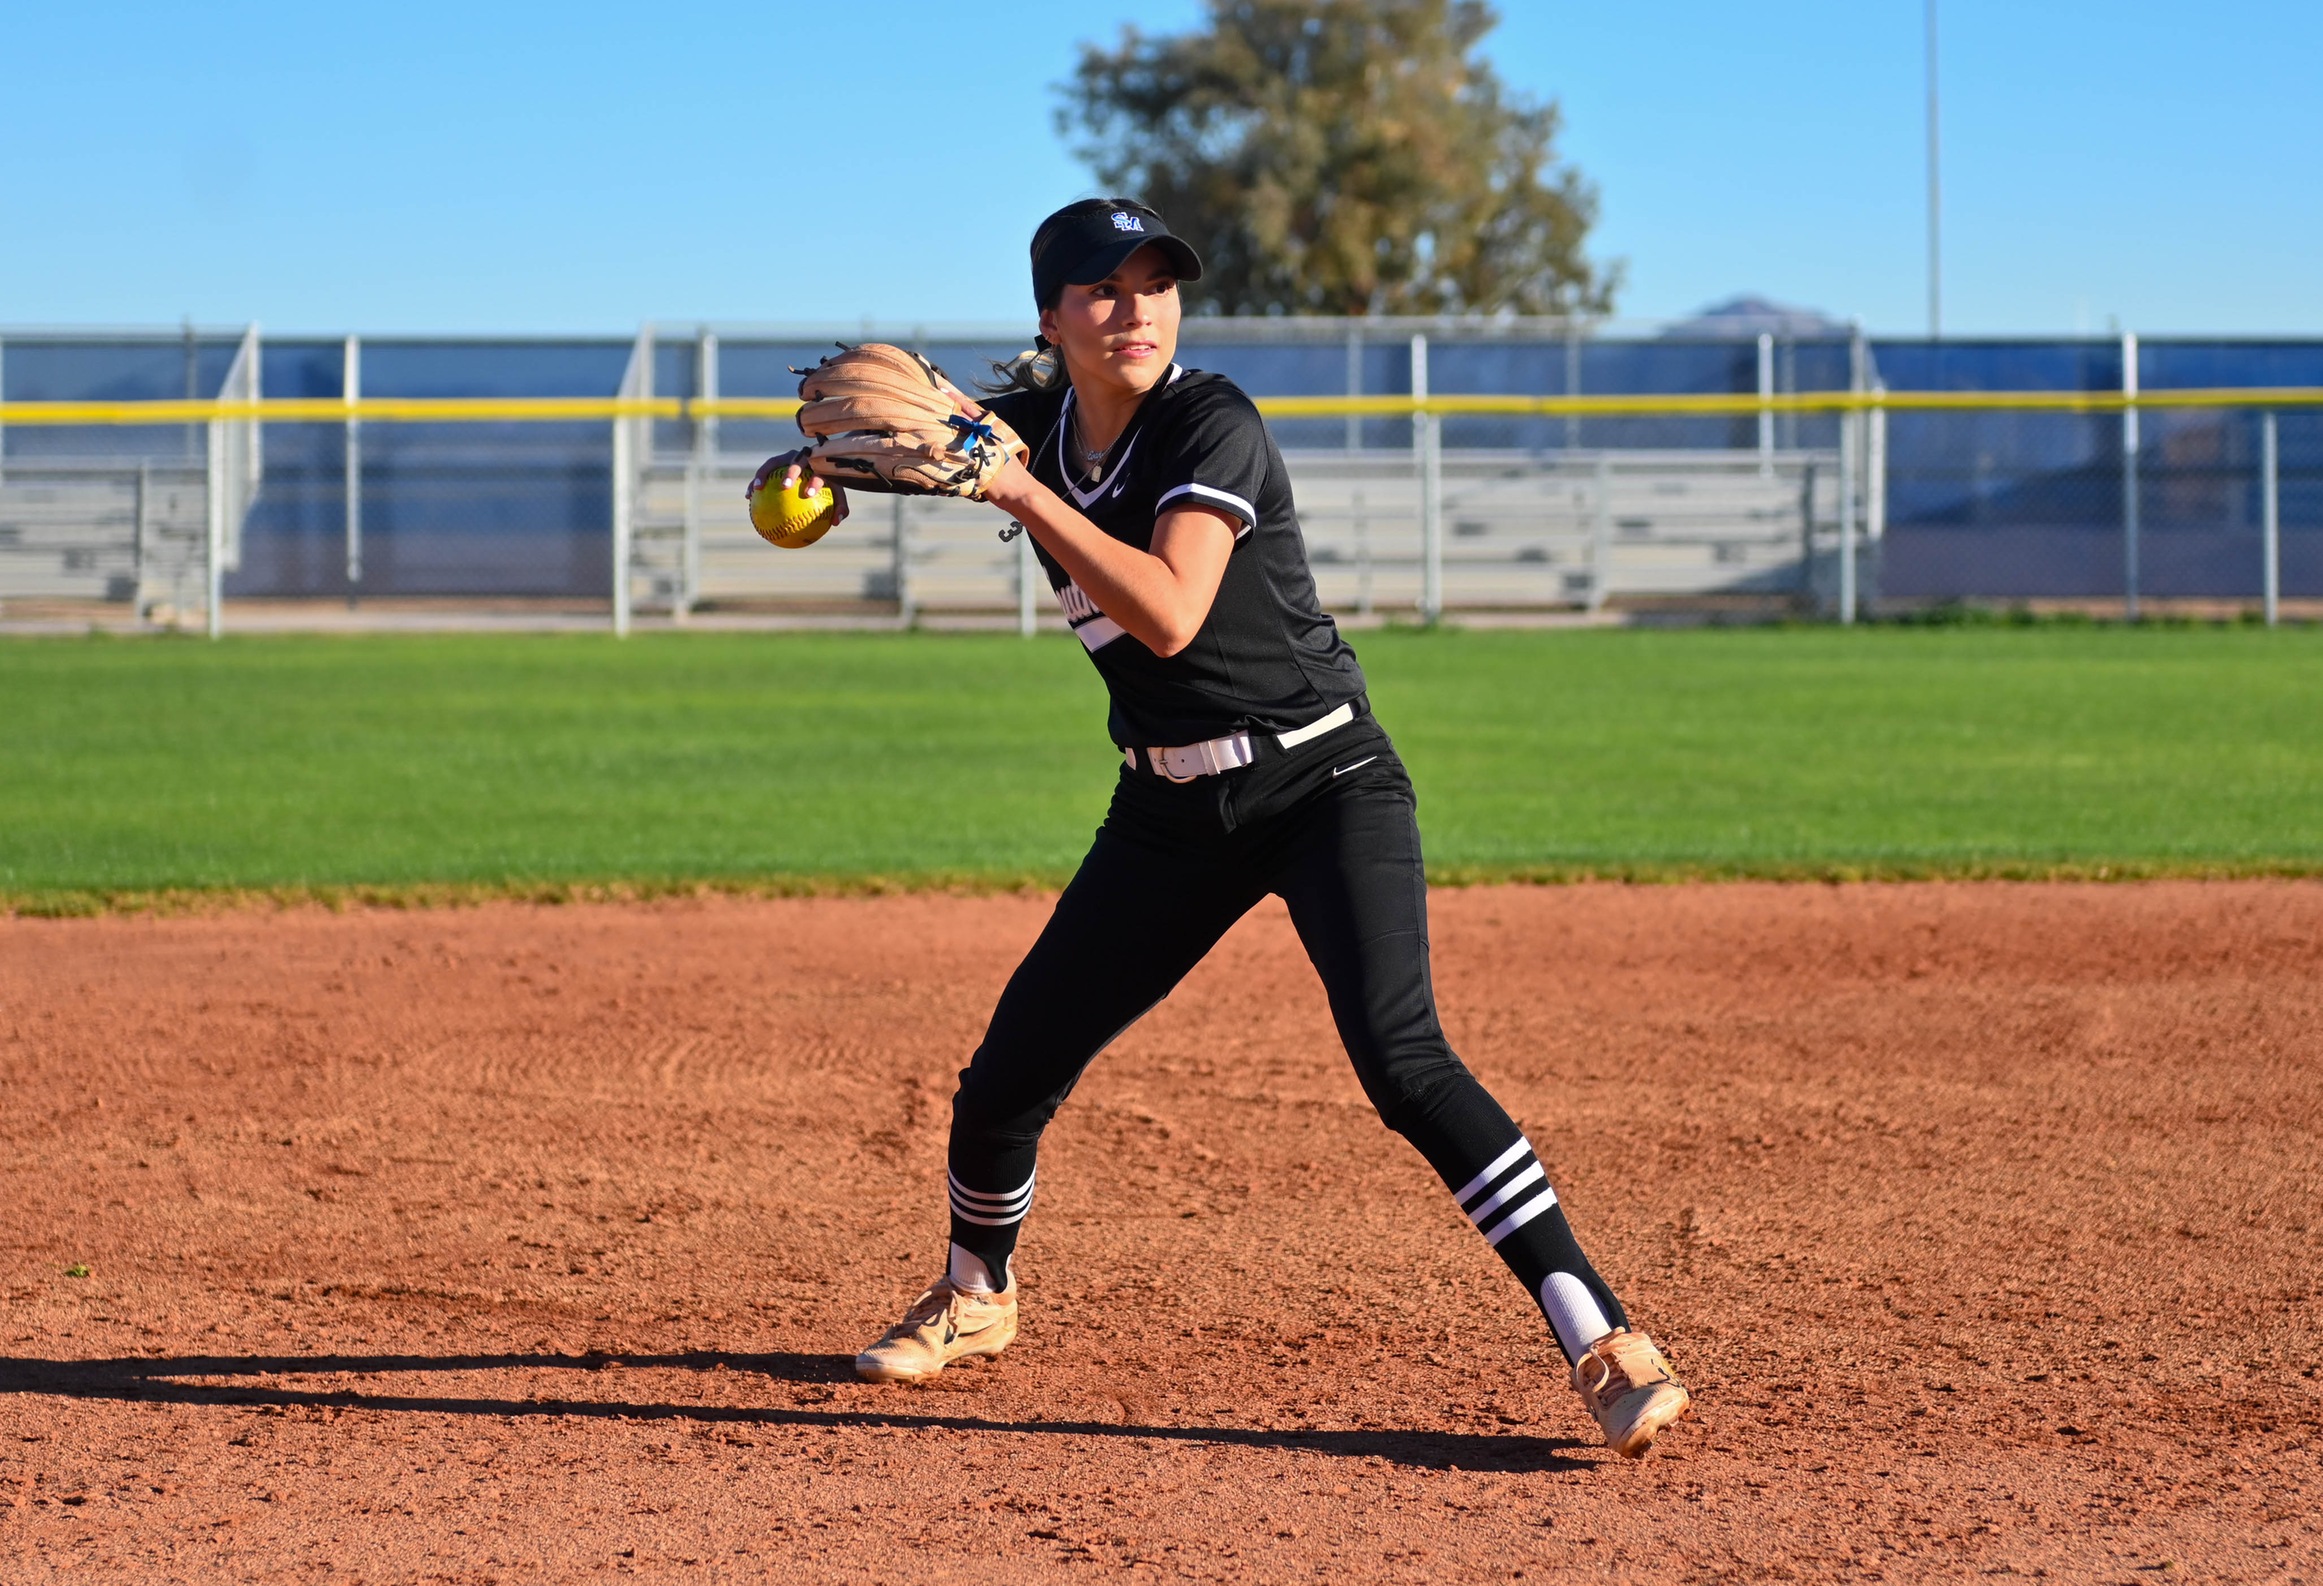 SMCC Softball Rolls to Doubleheader Sweep over PVCC